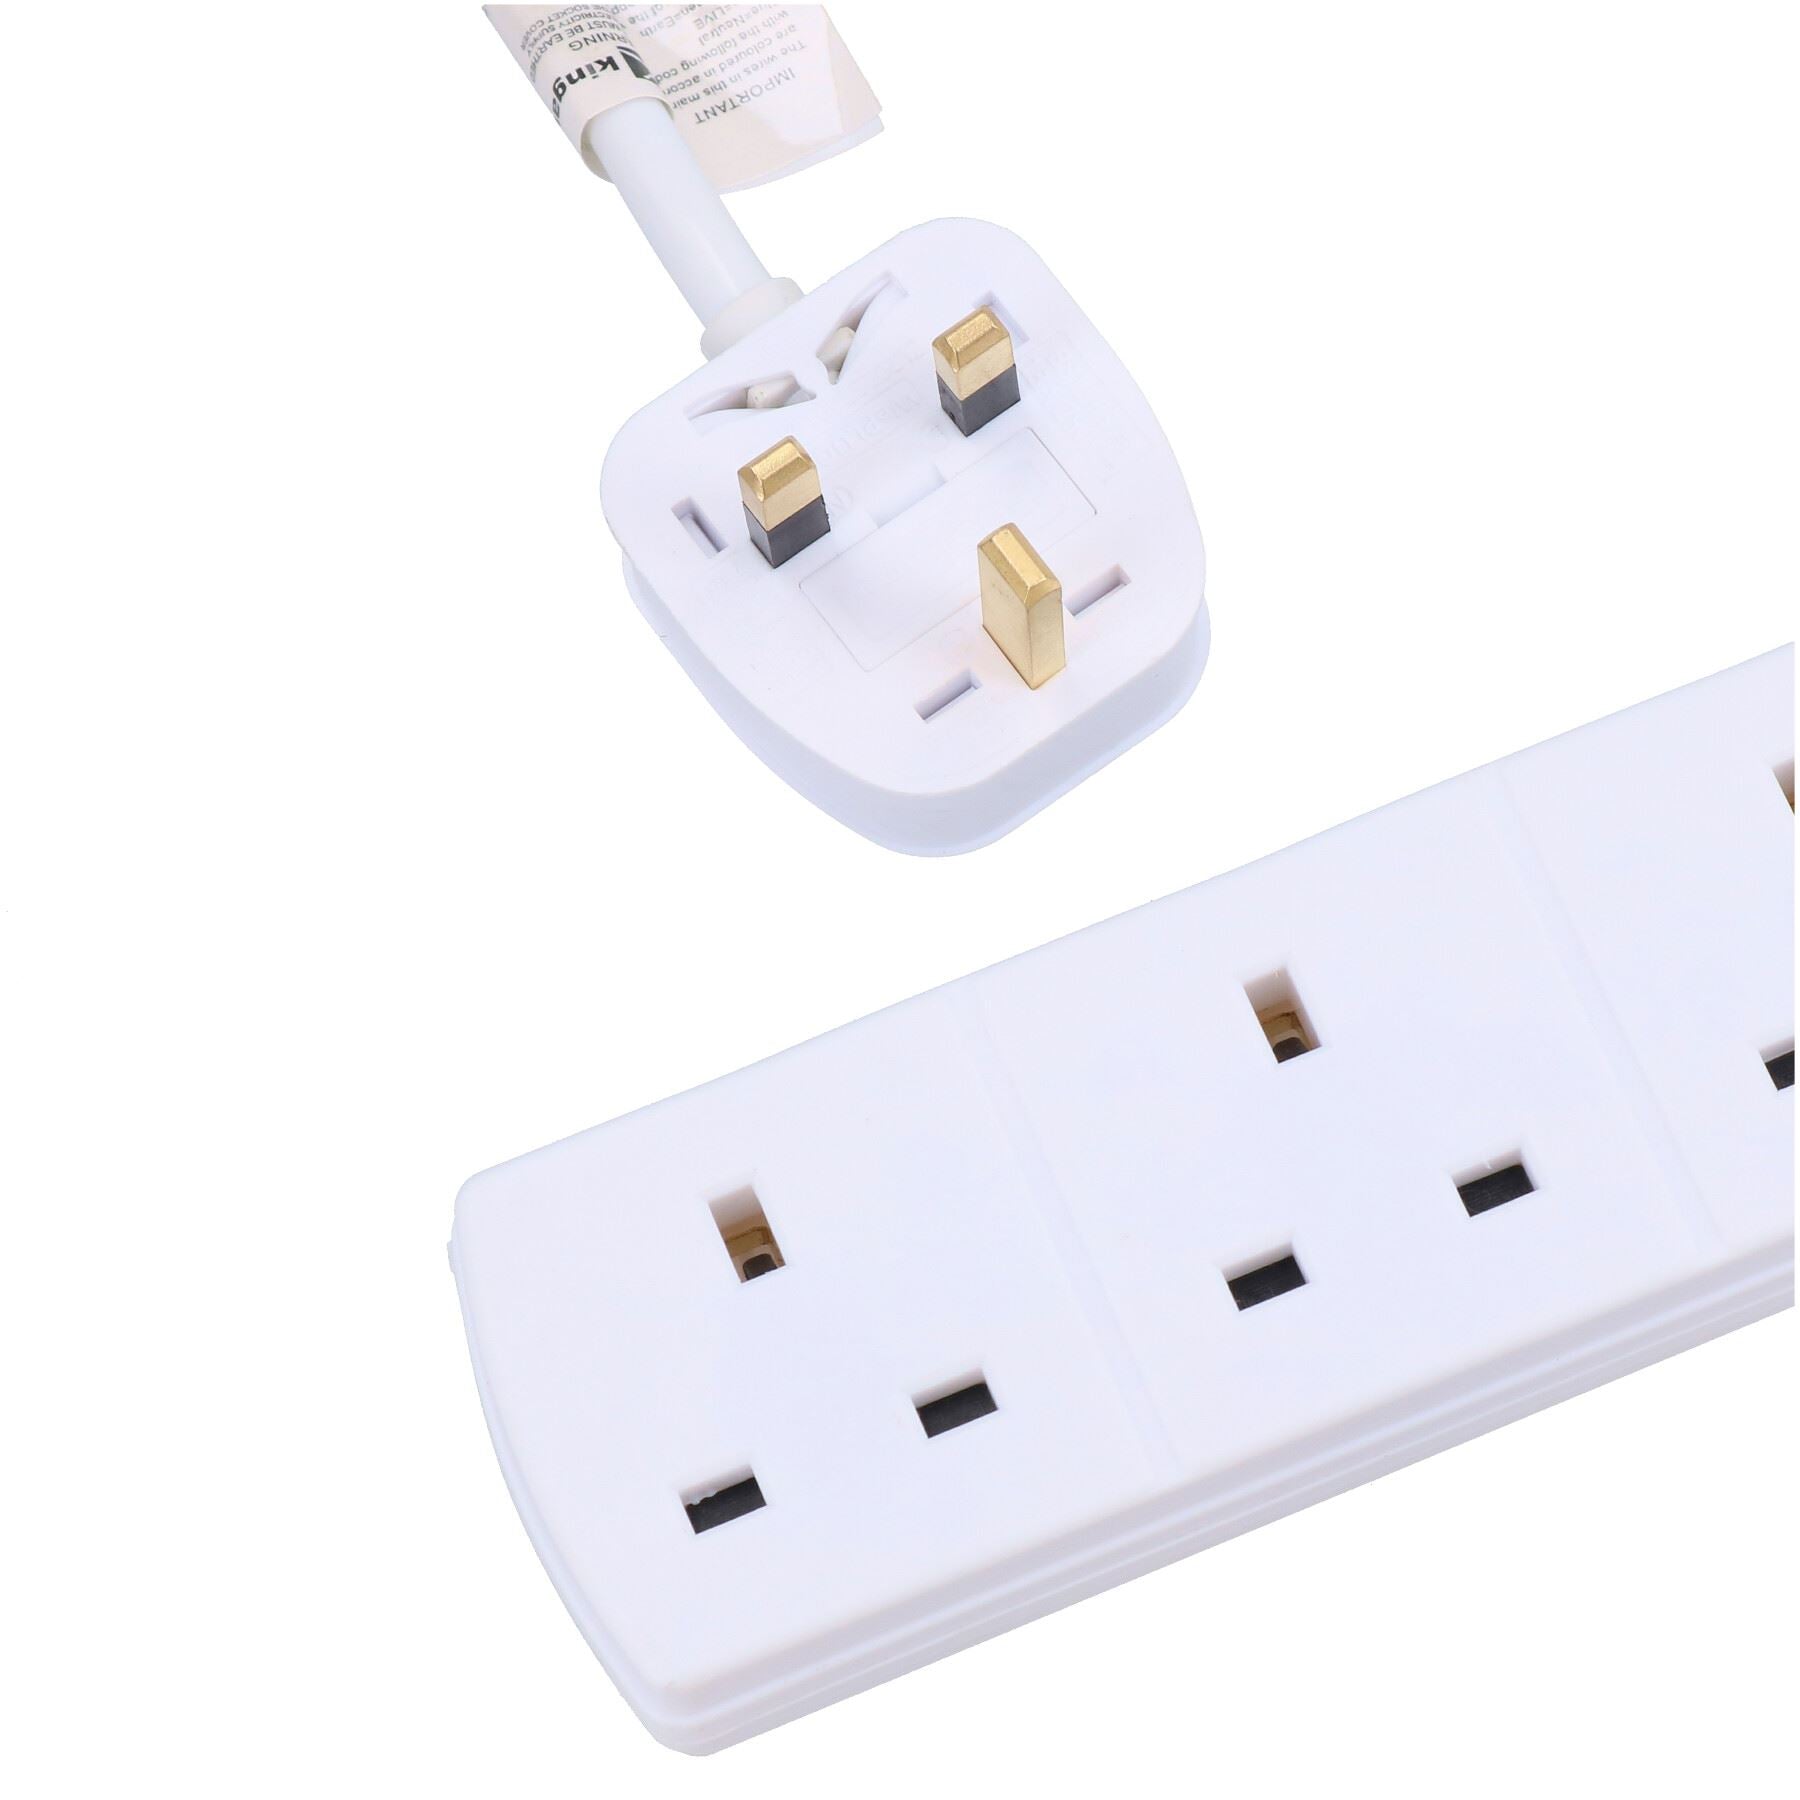 UK Plug 6 Gang Way Socket Extension lead Adaptor Sockets With 2m Cable